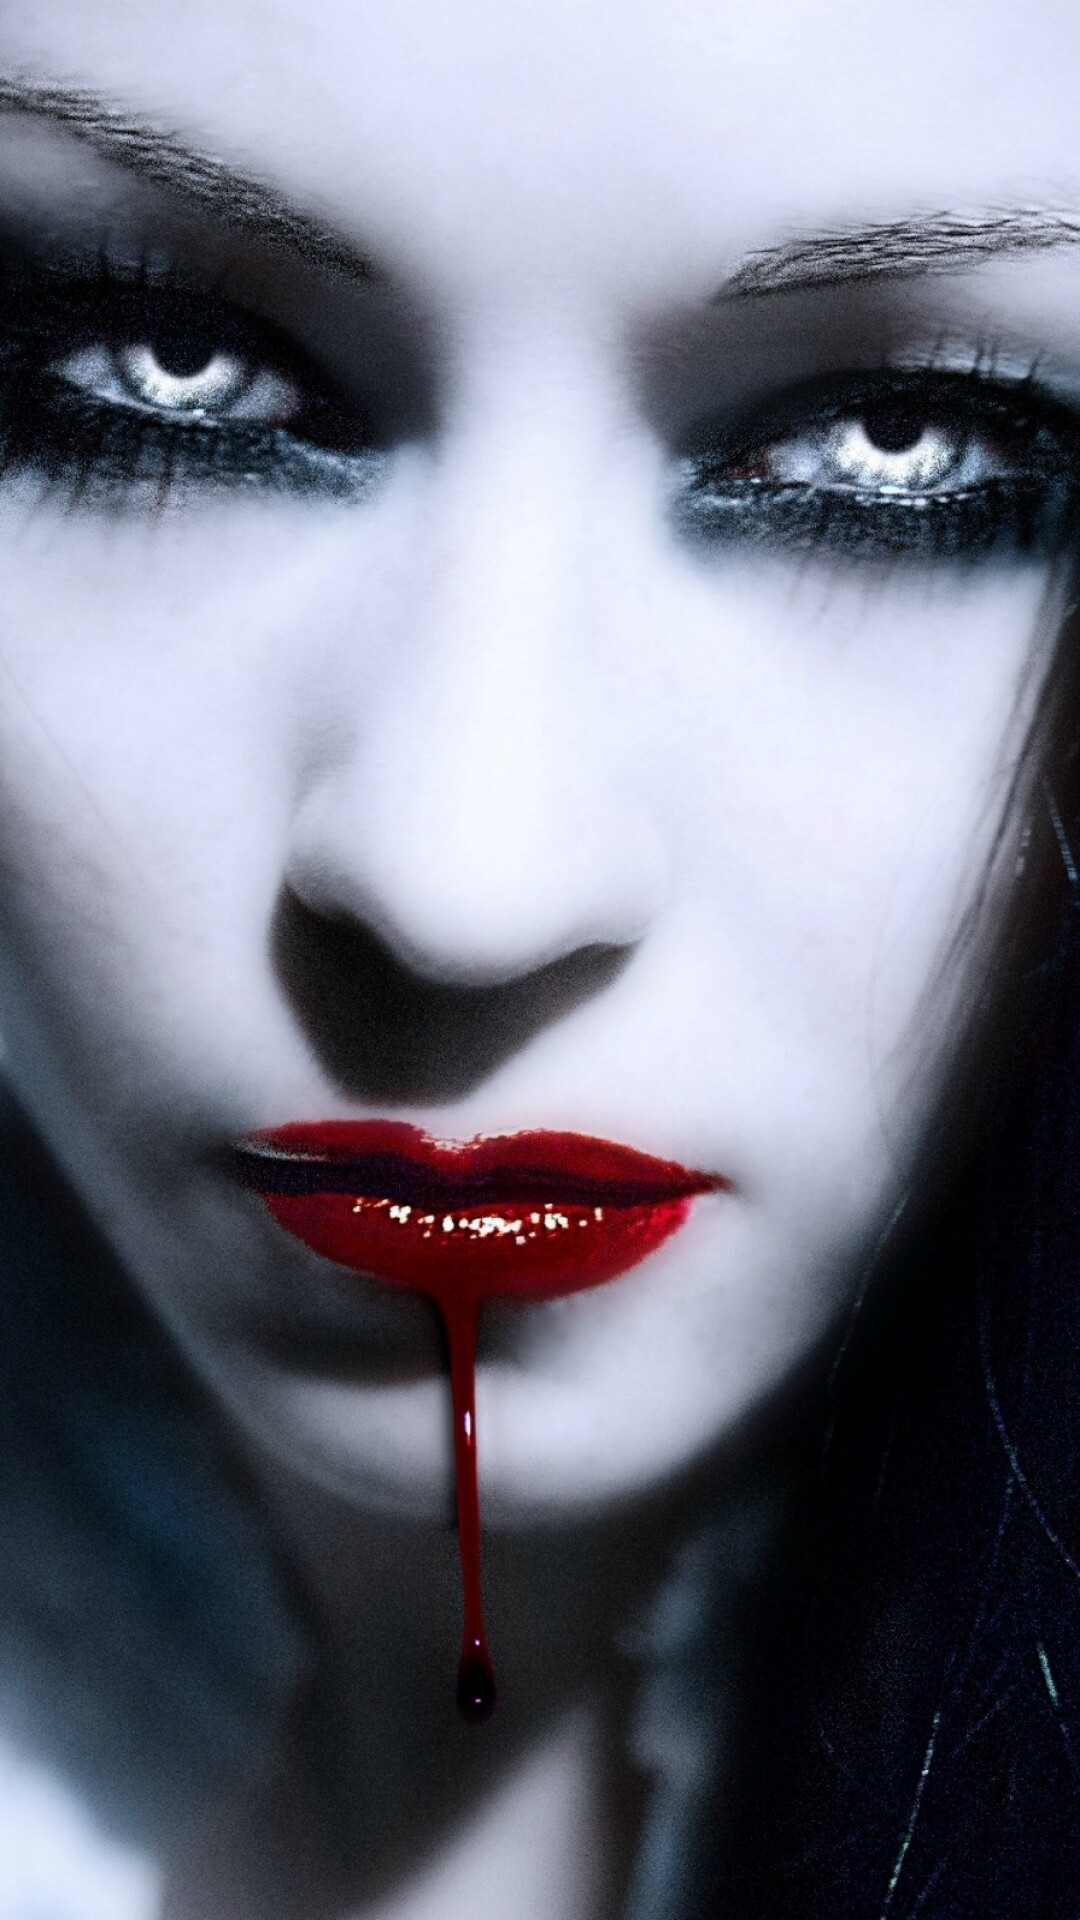 Vampire: A mythical being, drinking blood and avoiding sunlight. 1080x1920 Full HD Wallpaper.